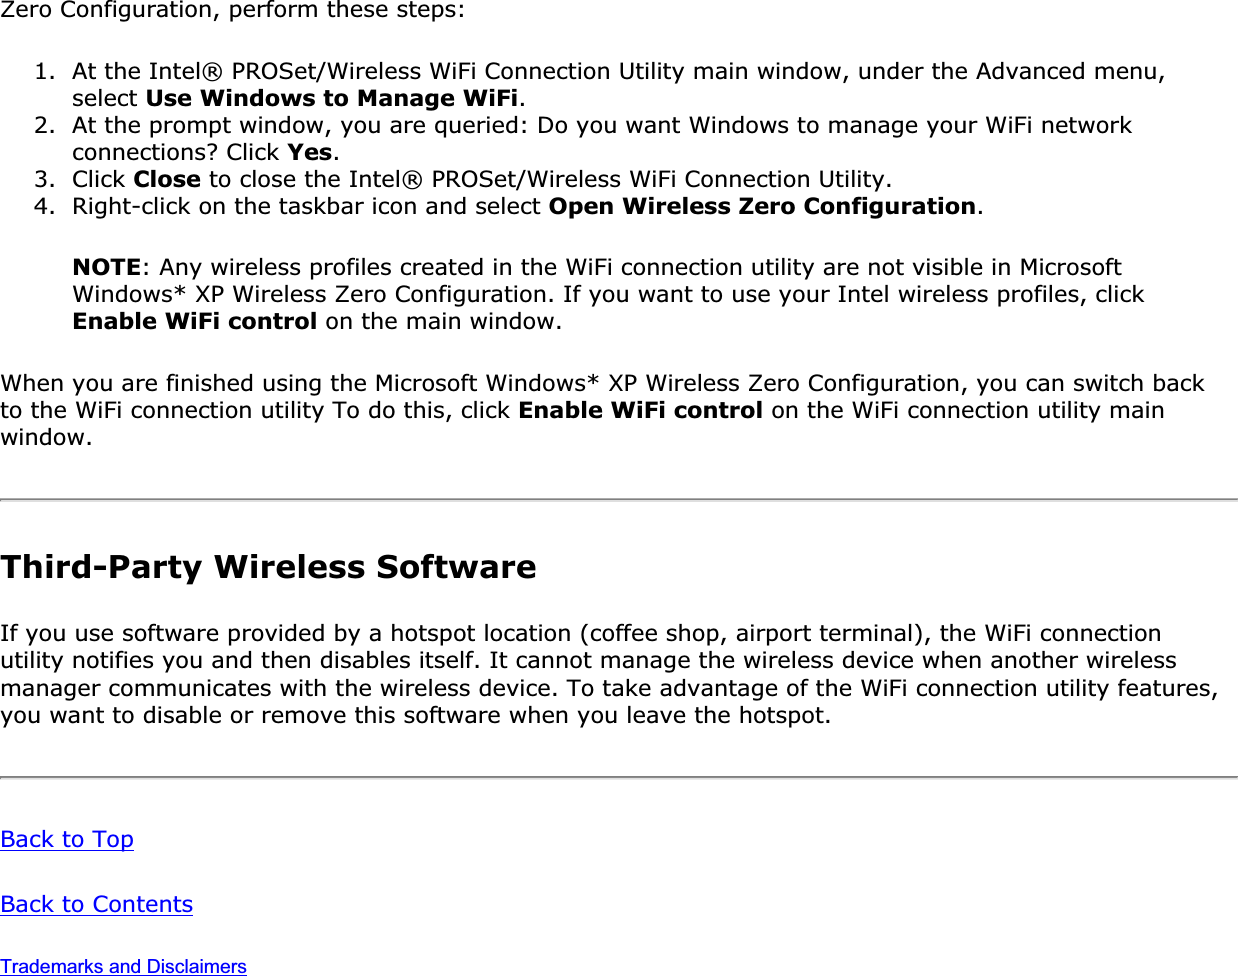 Zero Configuration, perform these steps: 1. At the Intel® PROSet/Wireless WiFi Connection Utility main window, under the Advanced menu, select Use Windows to Manage WiFi.2. At the prompt window, you are queried: Do you want Windows to manage your WiFi network connections? Click Yes.3. Click Close to close the Intel® PROSet/Wireless WiFi Connection Utility.4. Right-click on the taskbar icon and select Open Wireless Zero Configuration.NOTE: Any wireless profiles created in the WiFi connection utility are not visible in Microsoft Windows* XP Wireless Zero Configuration. If you want to use your Intel wireless profiles, click Enable WiFi control on the main window.When you are finished using the Microsoft Windows* XP Wireless Zero Configuration, you can switch back to the WiFi connection utility To do this, click Enable WiFi control on the WiFi connection utility main window.Third-Party Wireless SoftwareIf you use software provided by a hotspot location (coffee shop, airport terminal), the WiFi connection utility notifies you and then disables itself. It cannot manage the wireless device when another wireless manager communicates with the wireless device. To take advantage of the WiFi connection utility features, you want to disable or remove this software when you leave the hotspot. Back to TopBack to ContentsTrademarks and Disclaimers